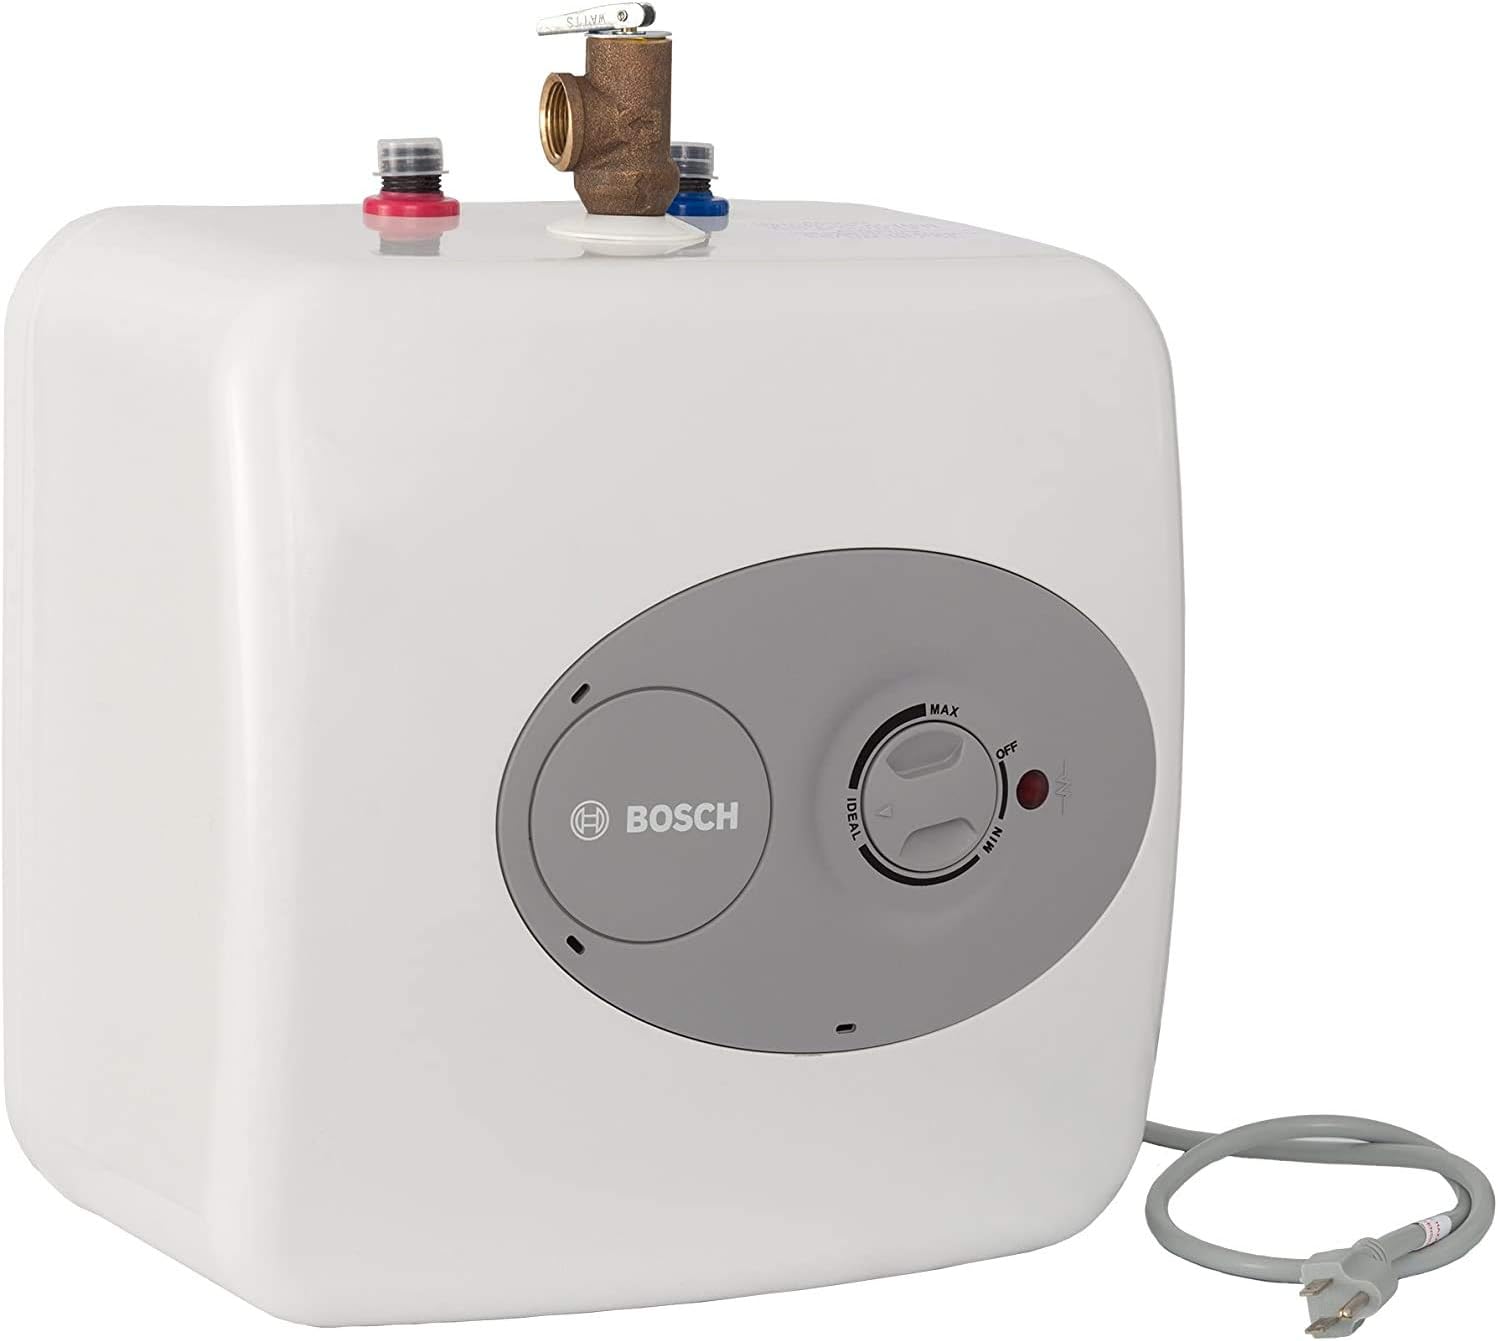 hot water heater brand product comparison